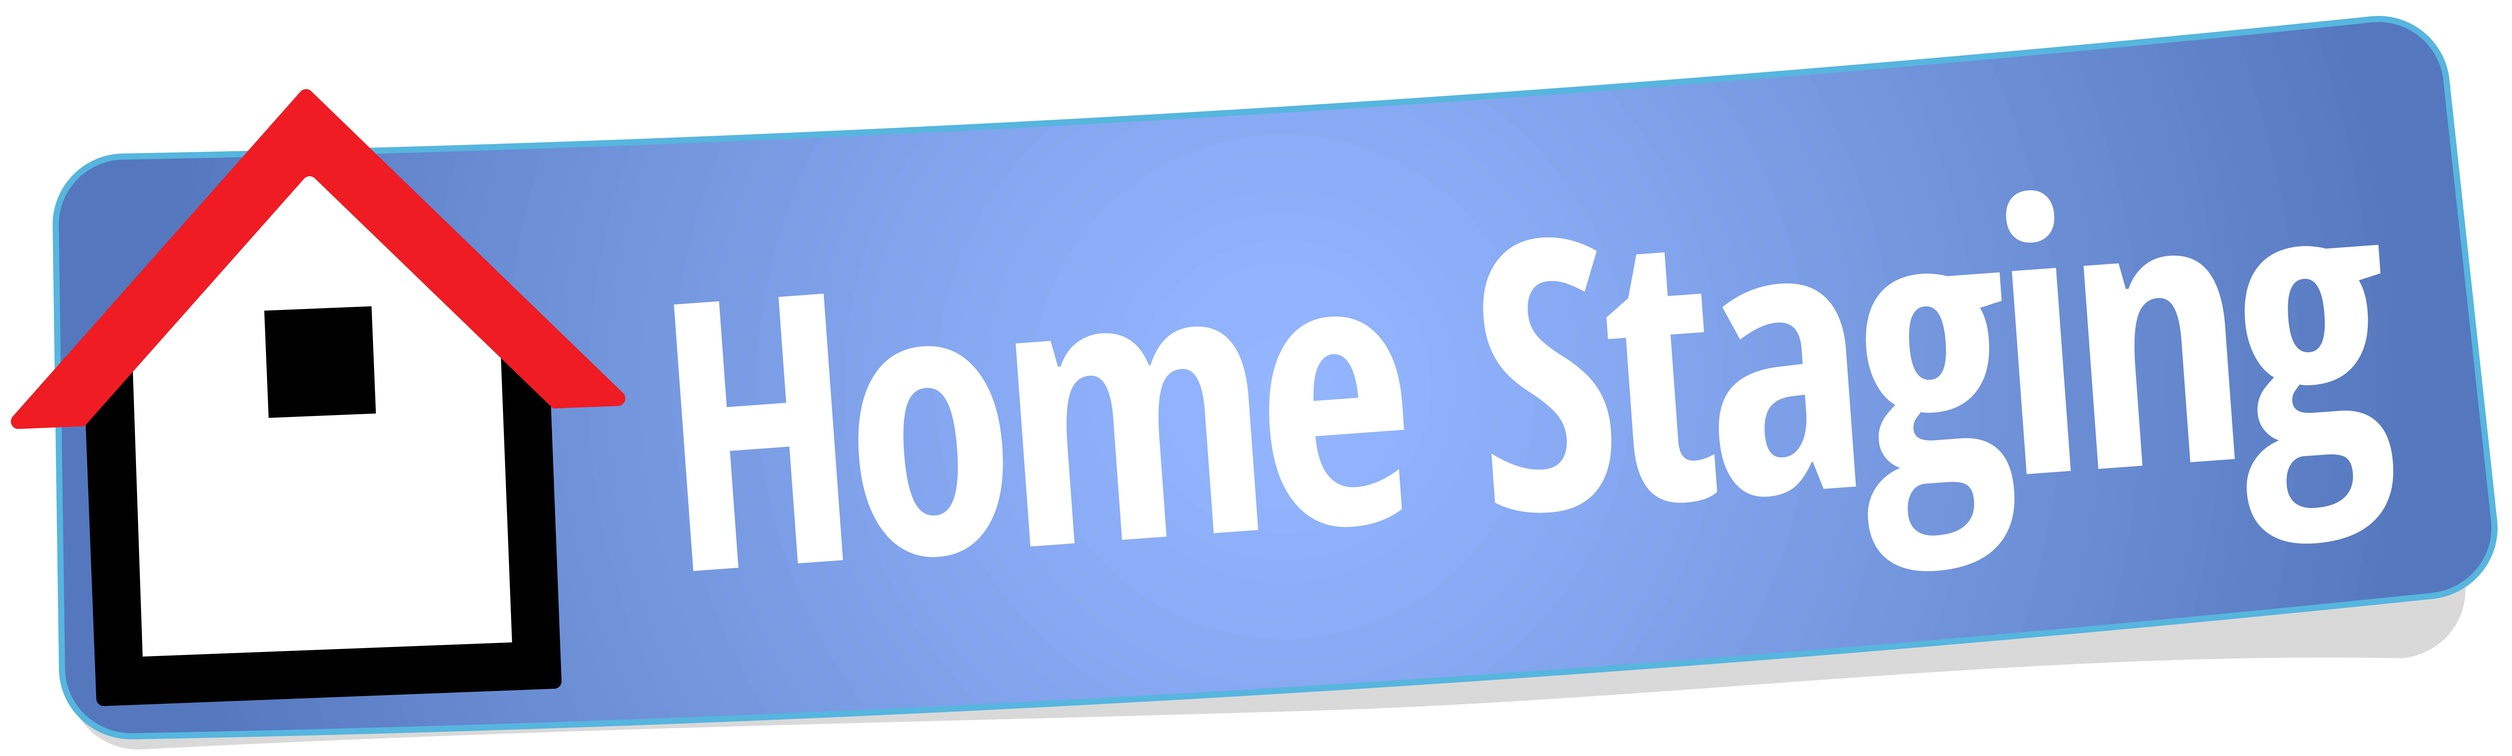 home staging logo